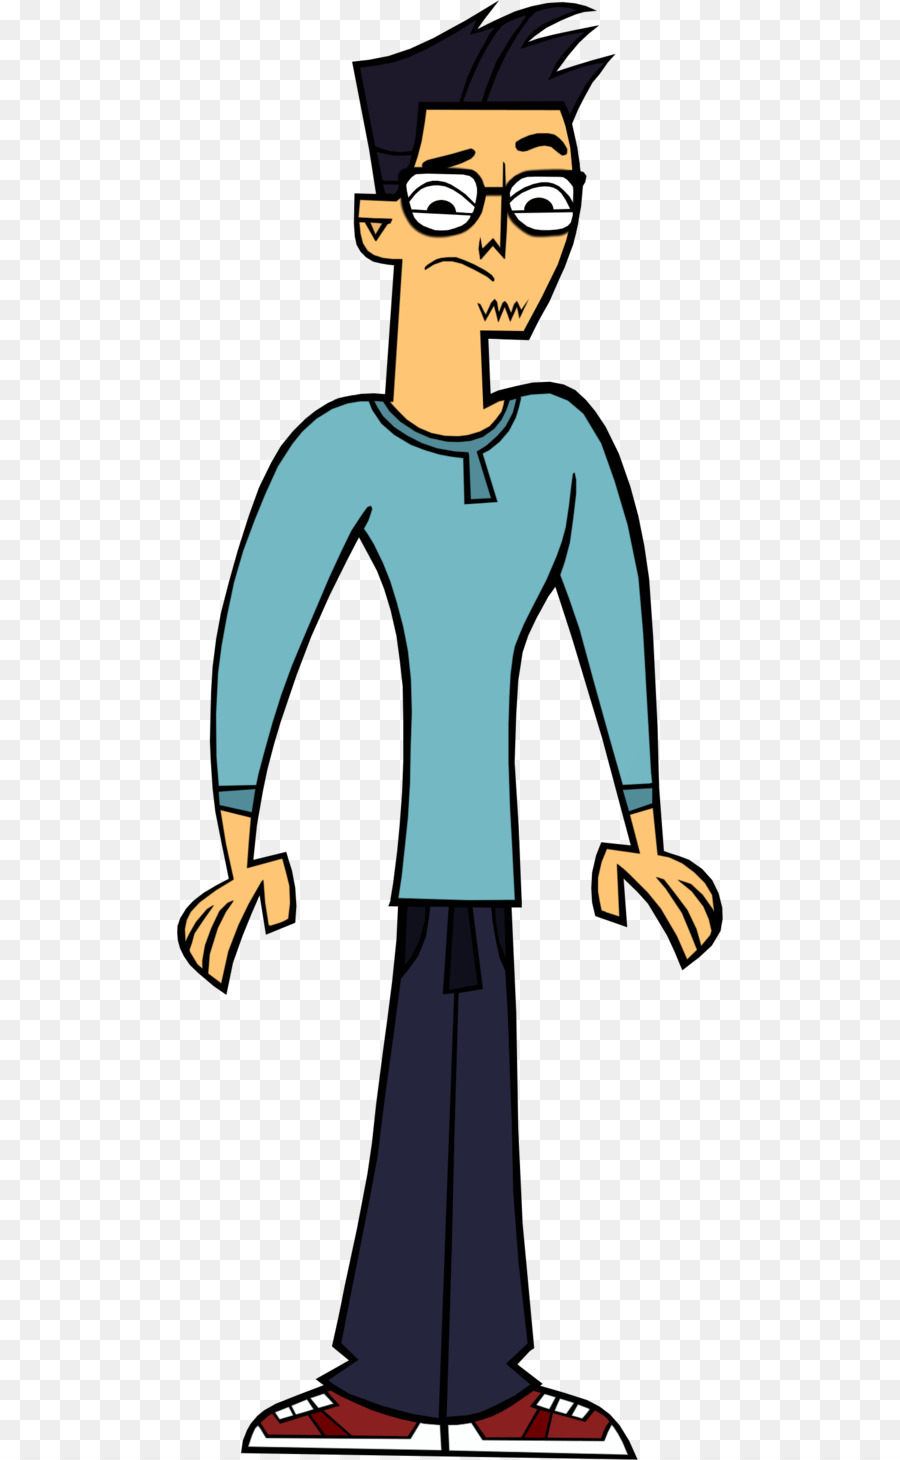 Total Drama Action png images